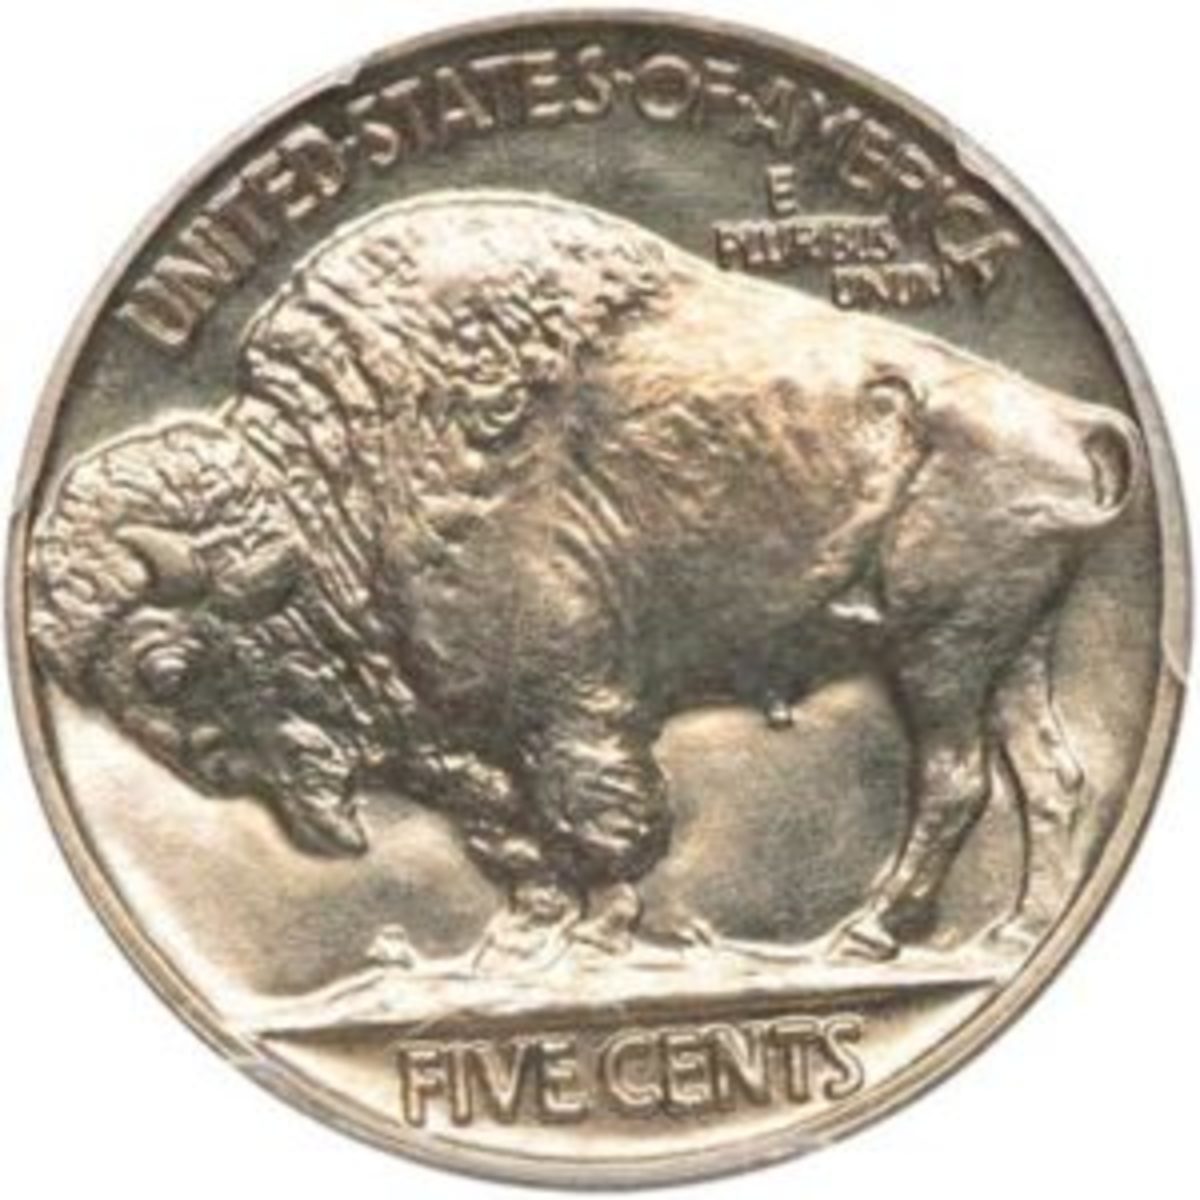 The Buffalo Nickel, Another Iconic American Coin - Grand Rapids Coins